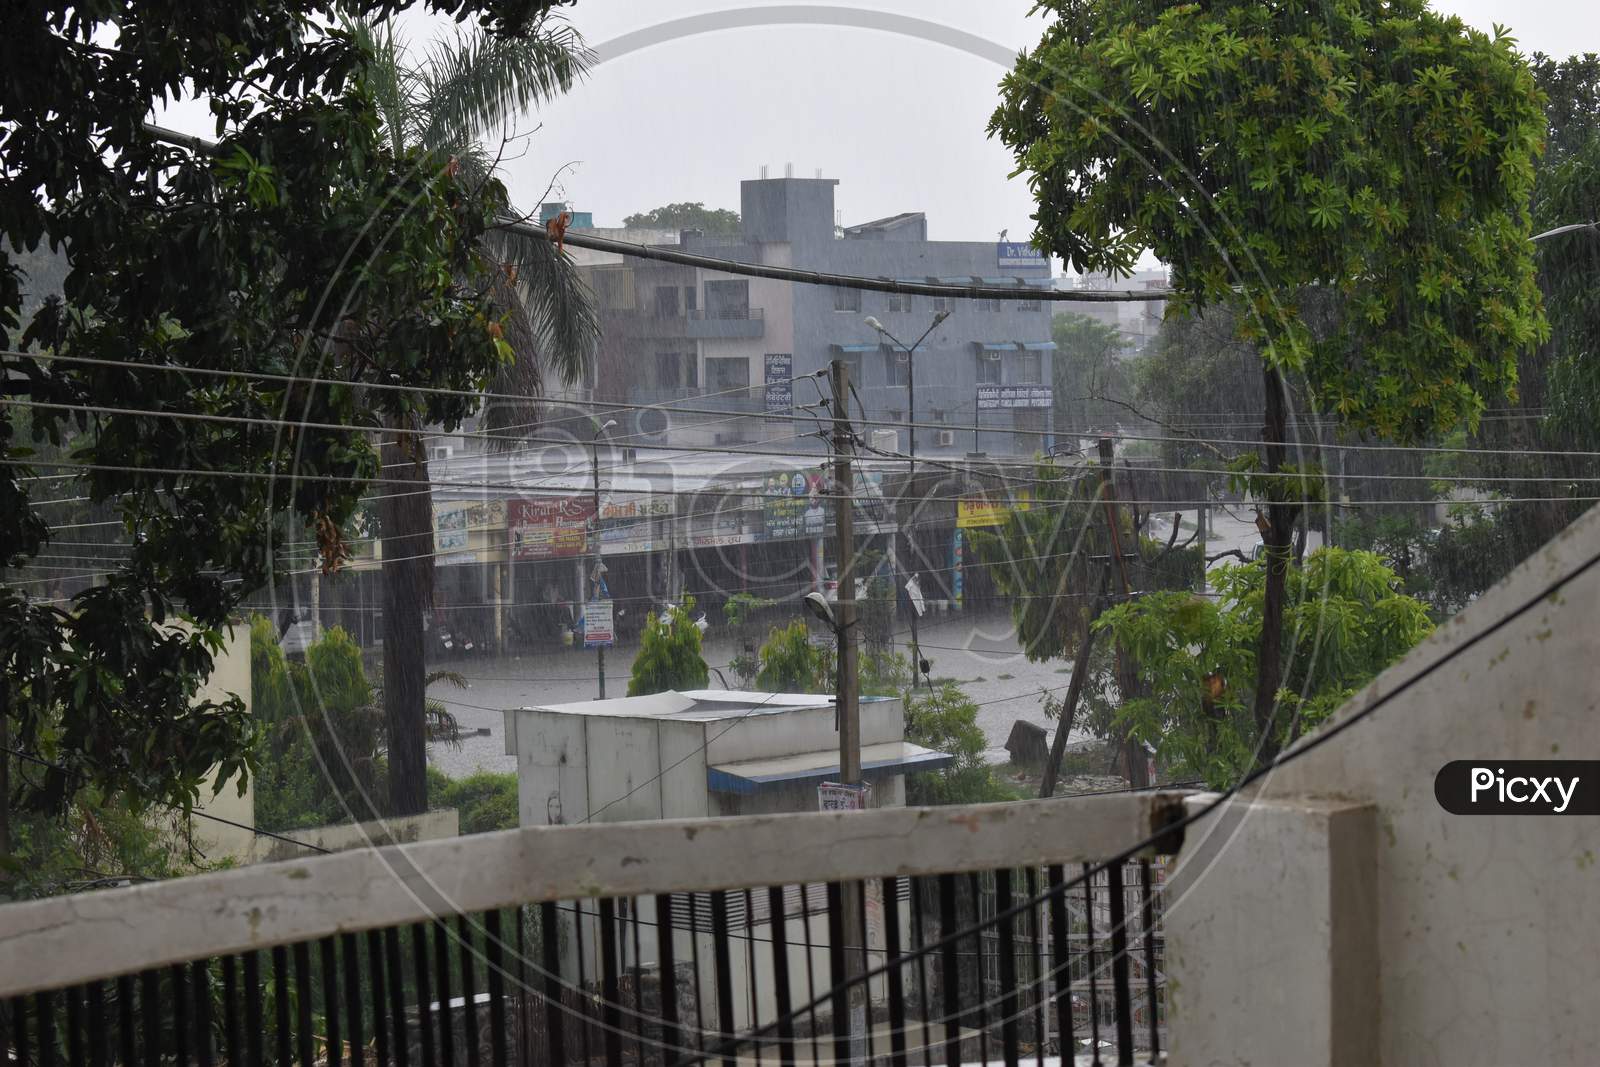 View Of City In Rainy Day Of Monsoon In Khanna, Punjab India 06 04 2021